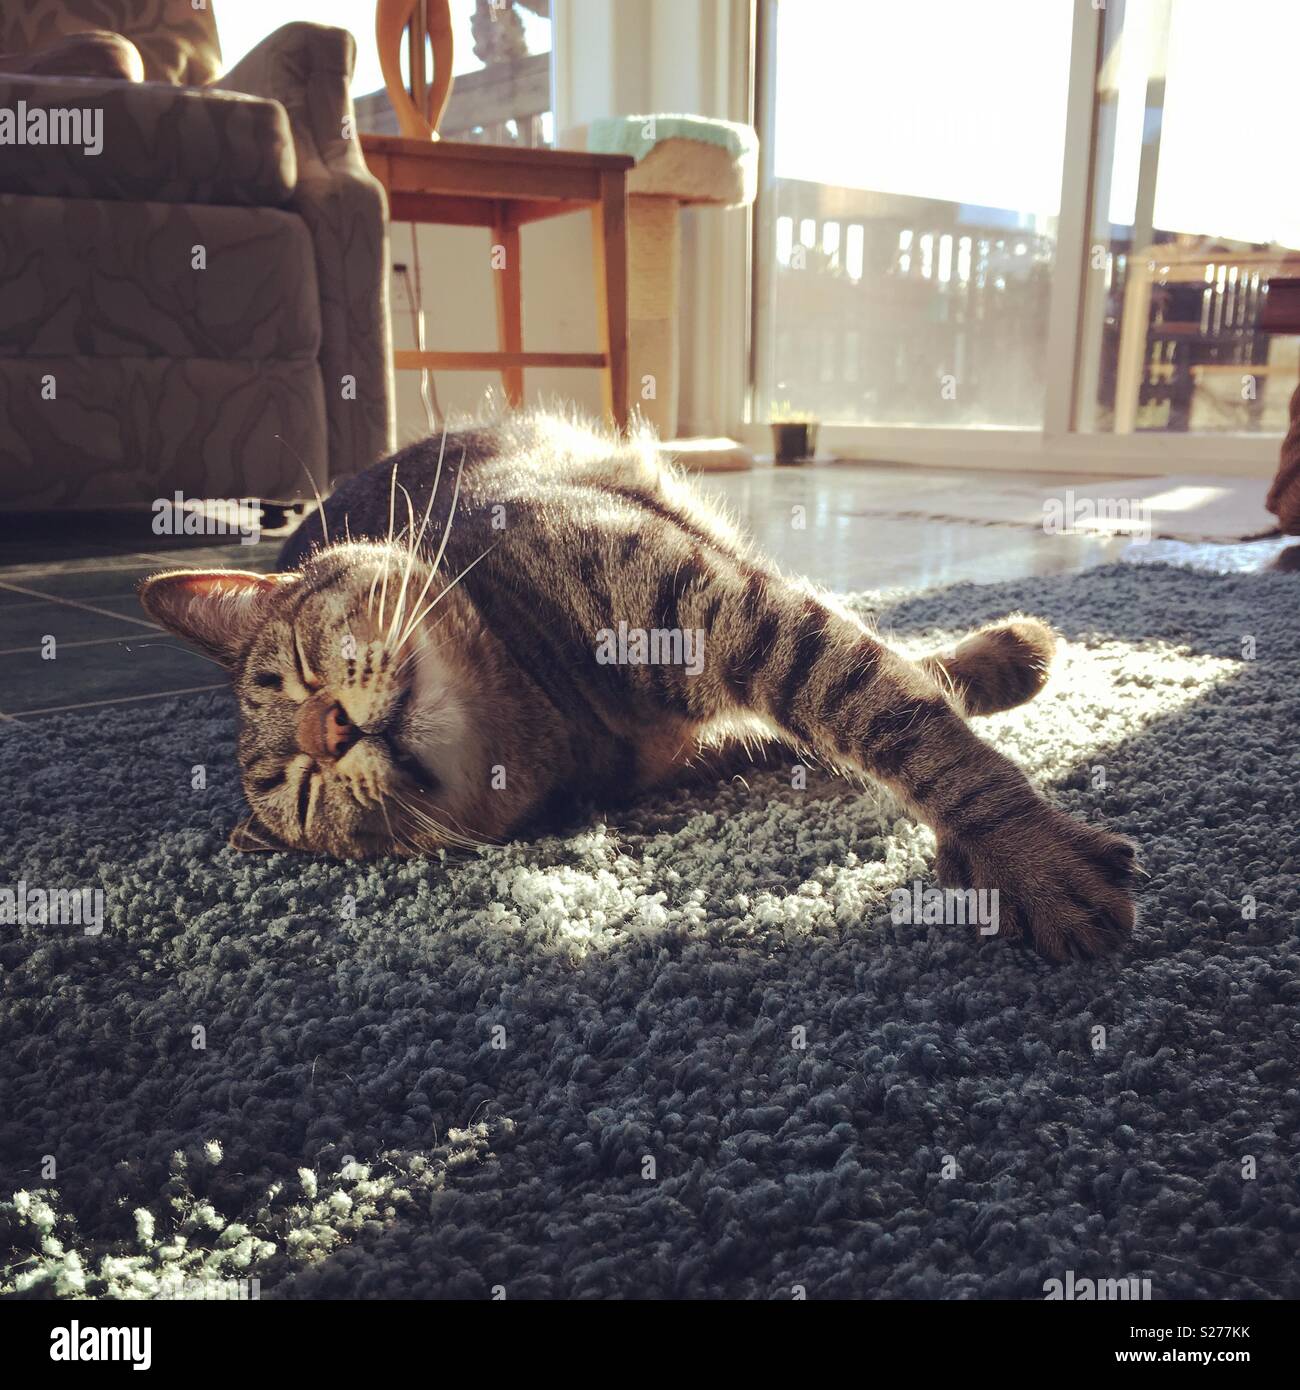 A cat stretching in the sunlight. Stock Photo